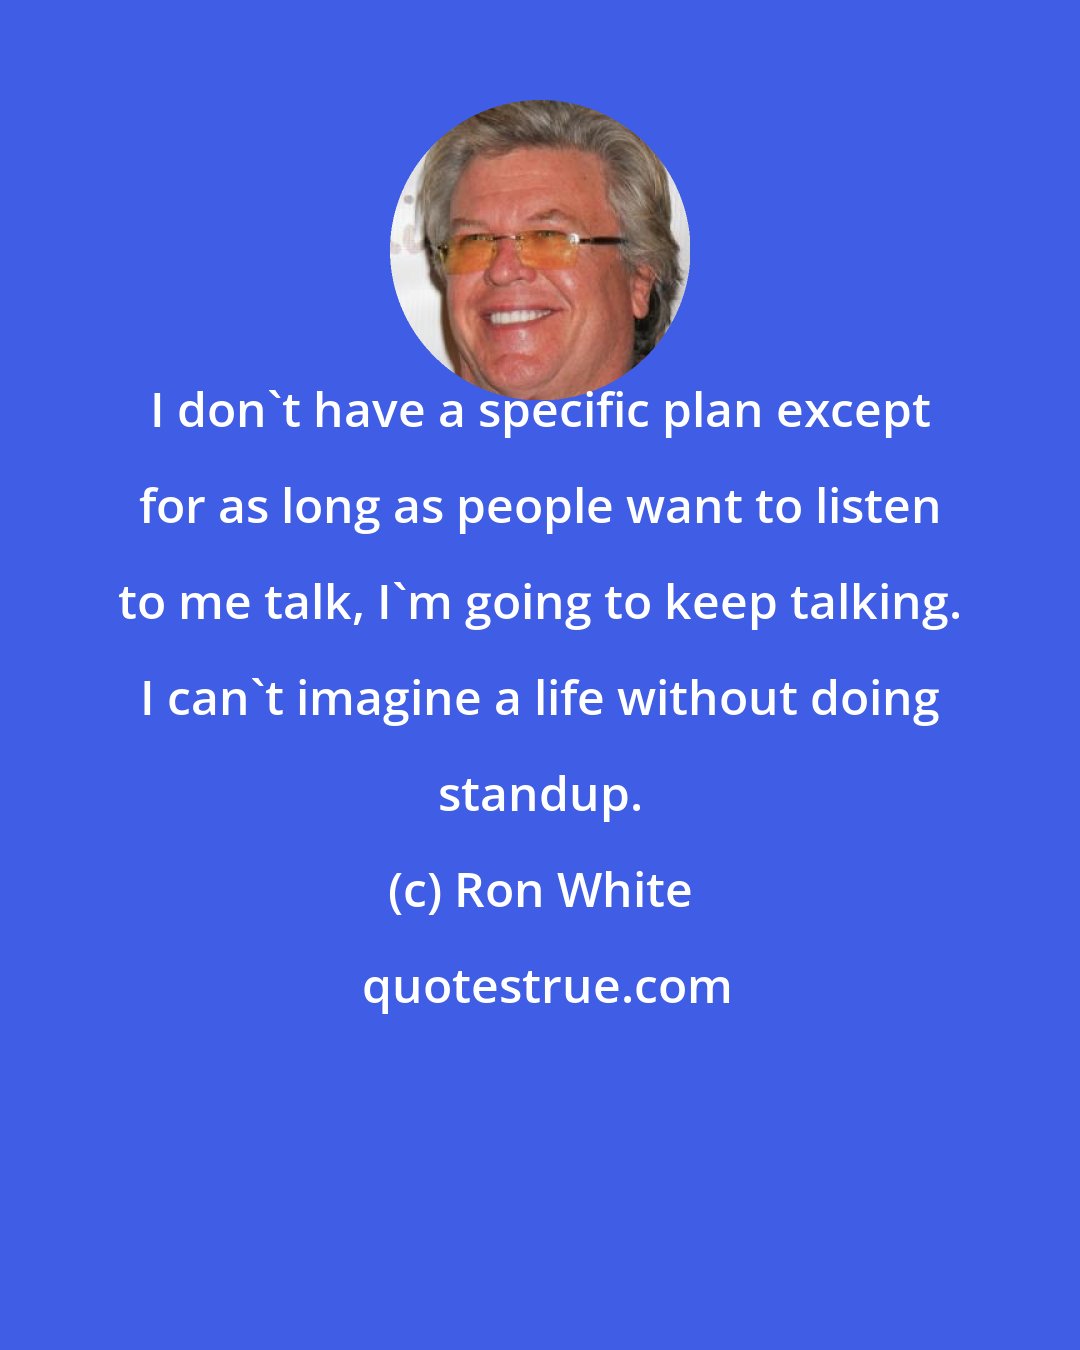 Ron White: I don't have a specific plan except for as long as people want to listen to me talk, I'm going to keep talking. I can't imagine a life without doing standup.